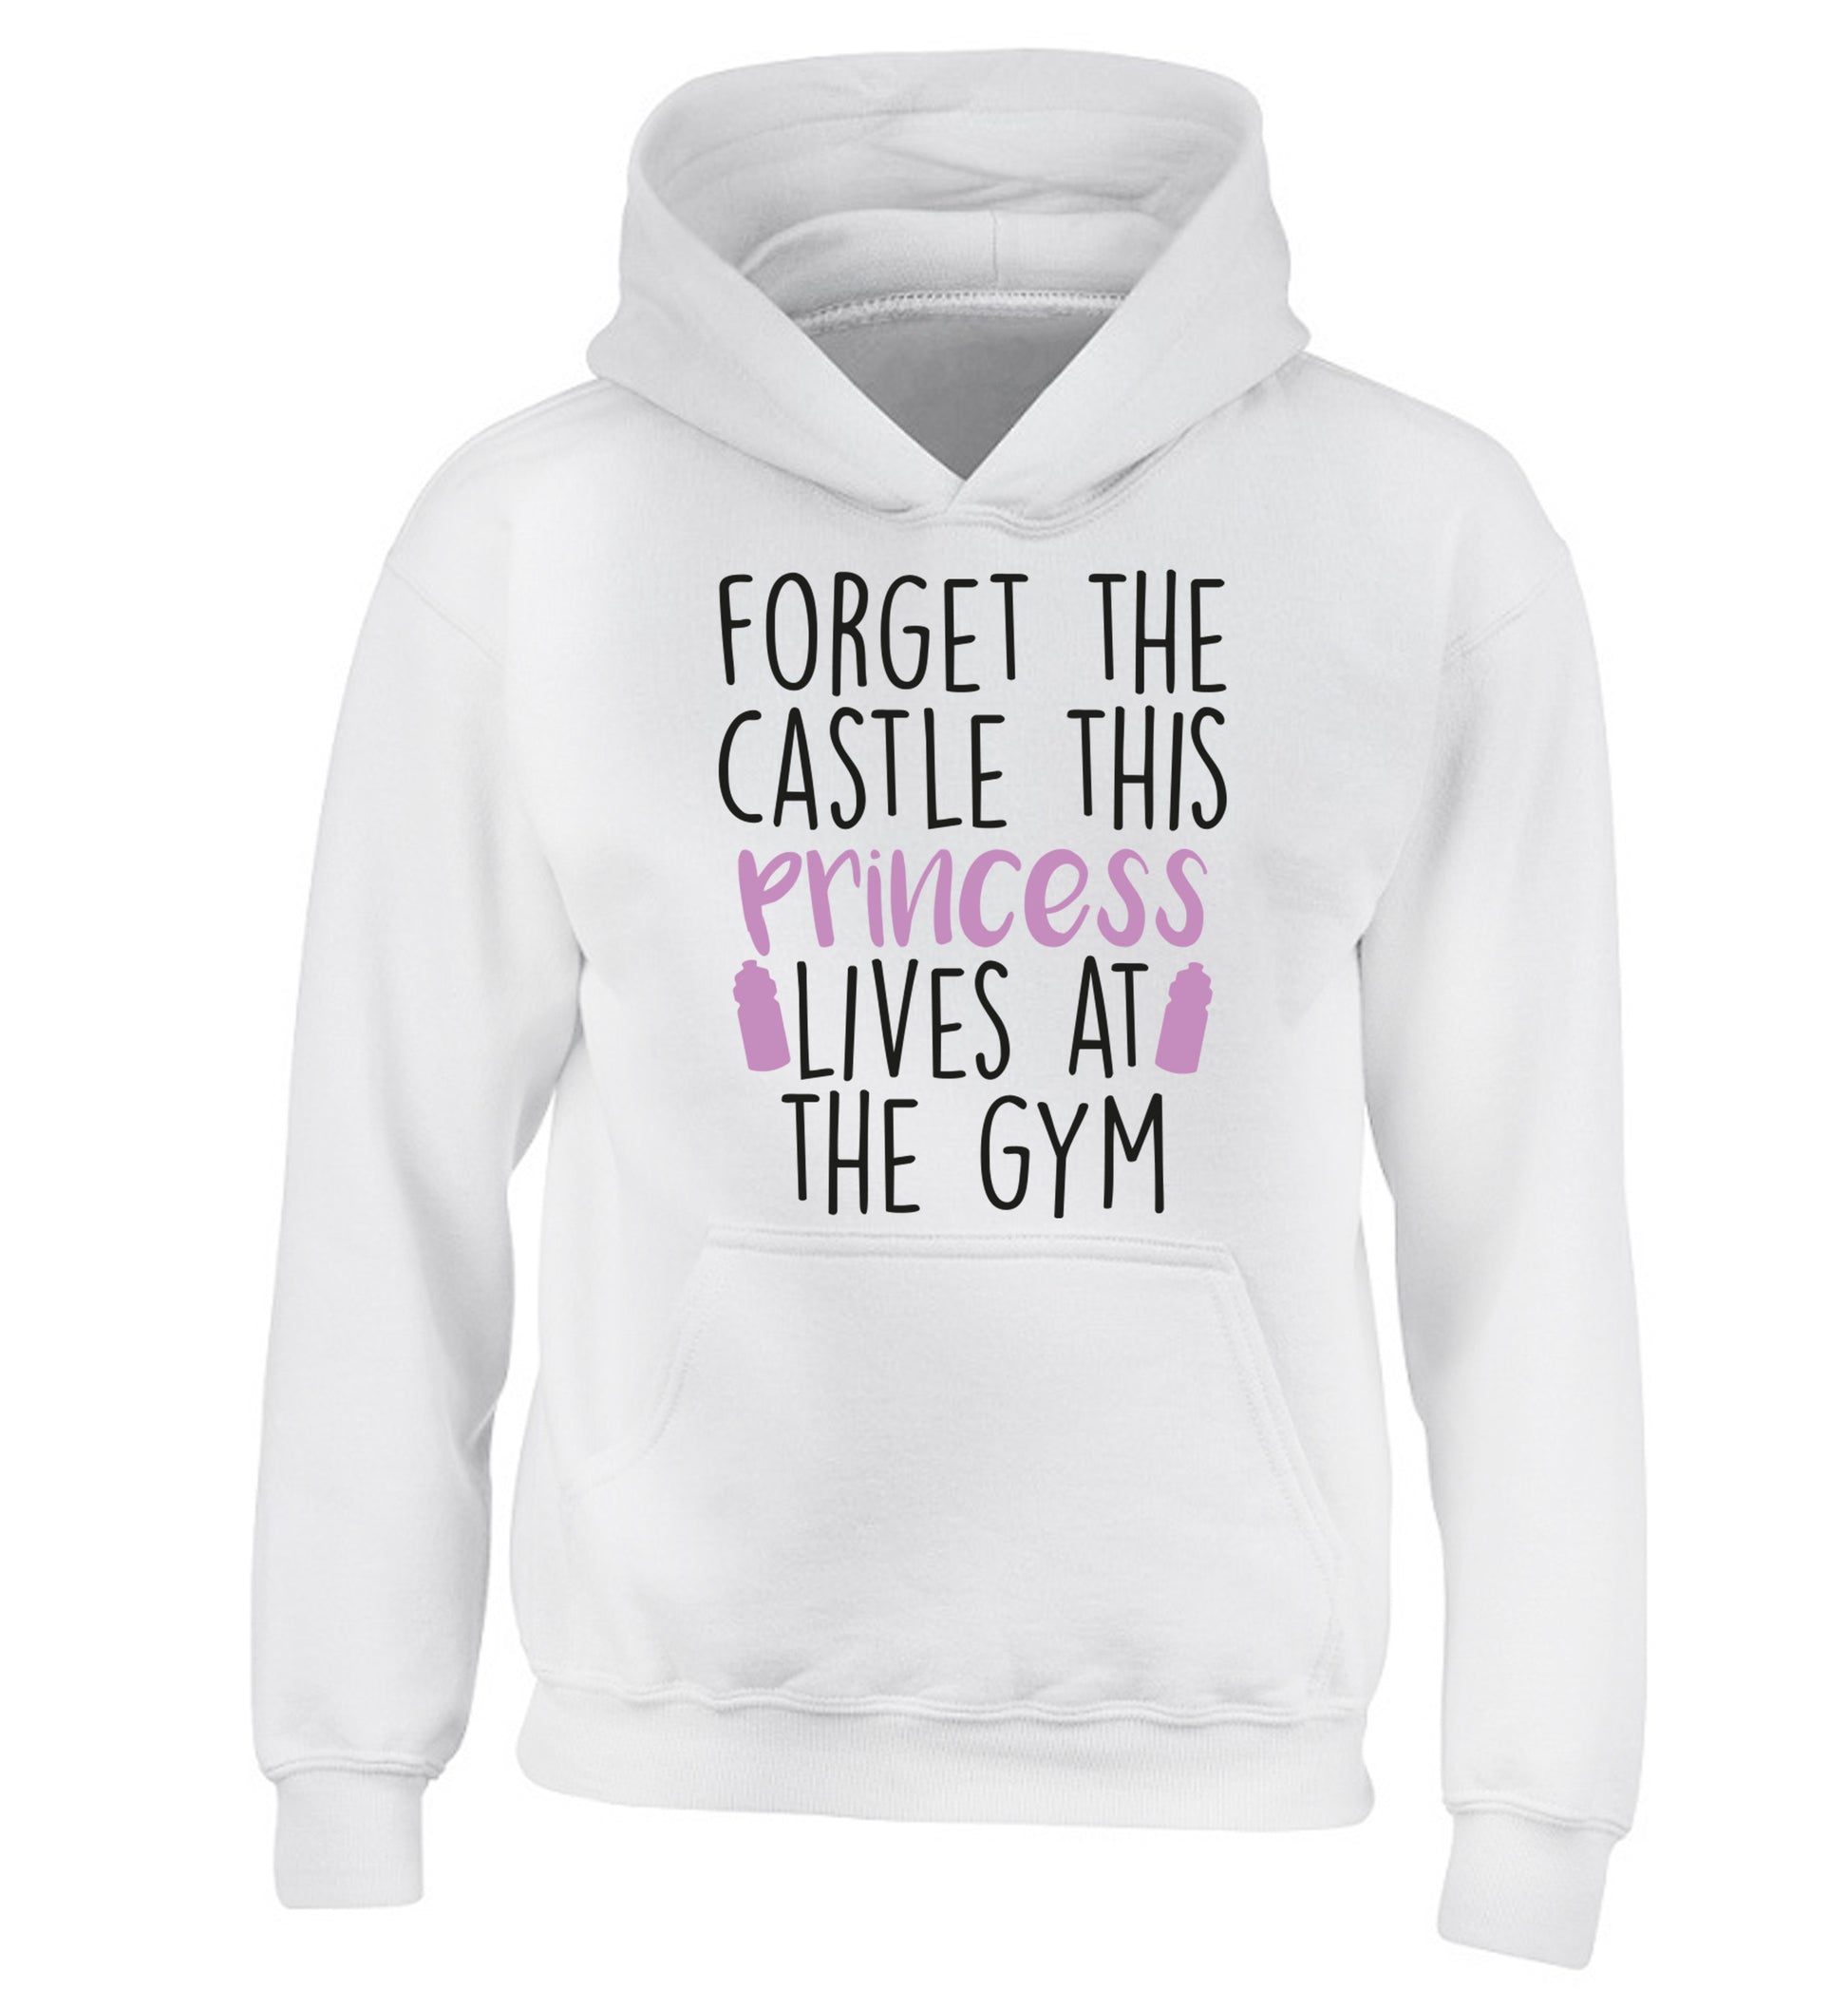 Forget the castle this princess lives at the gym children's white hoodie 12-14 Years